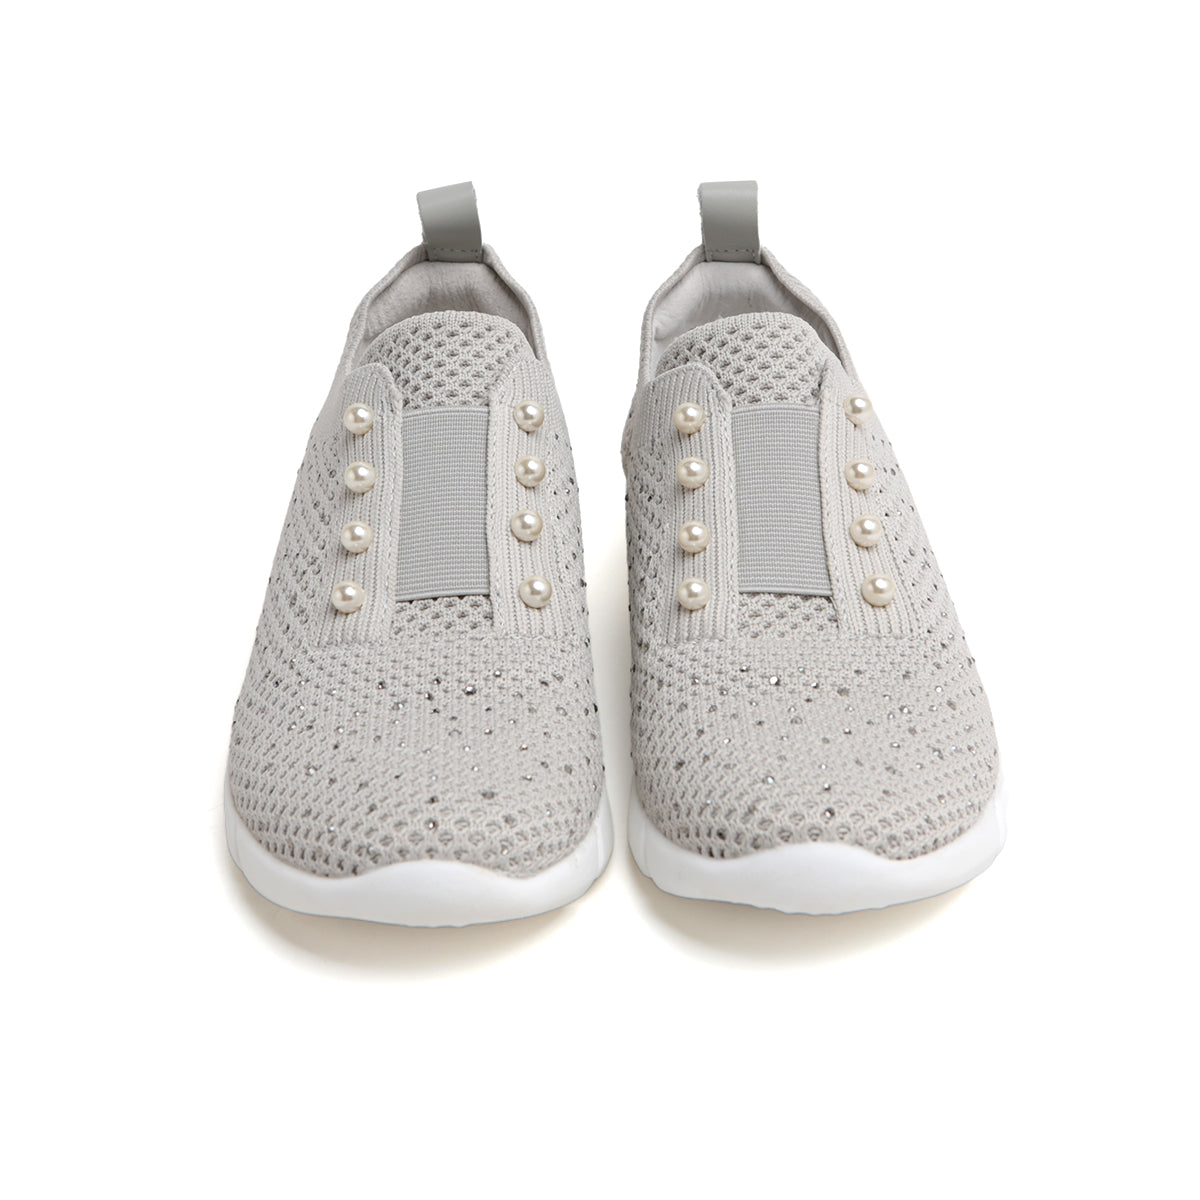 Grey Knit Pearl and Crystal Slip On Sneakers